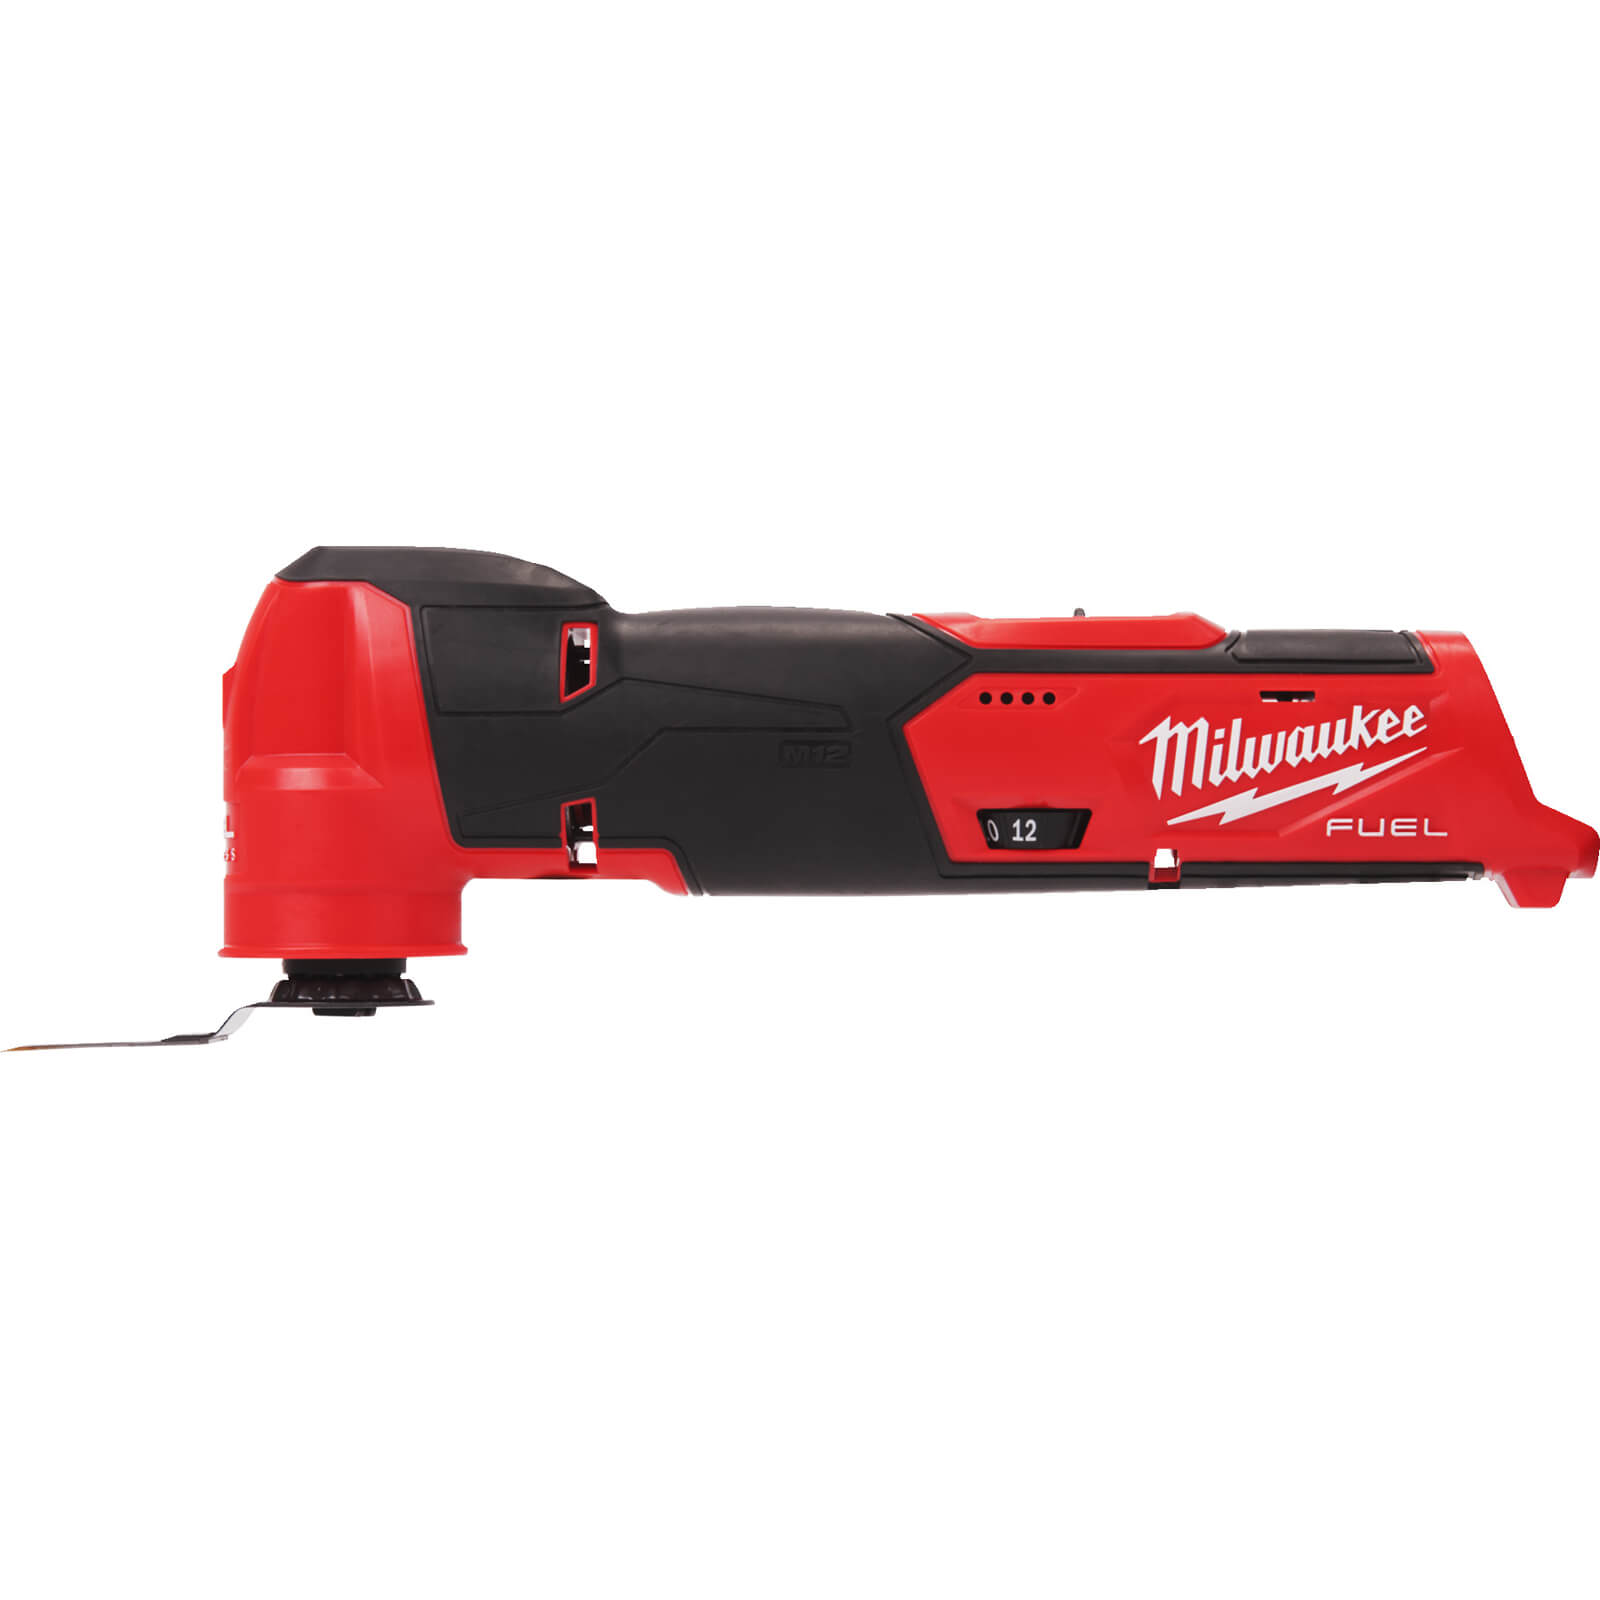 Image of Milwaukee M12 FMT Fuel 12v Cordless Brushless Oscillating Multi Tool No Batteries No Charger No Case